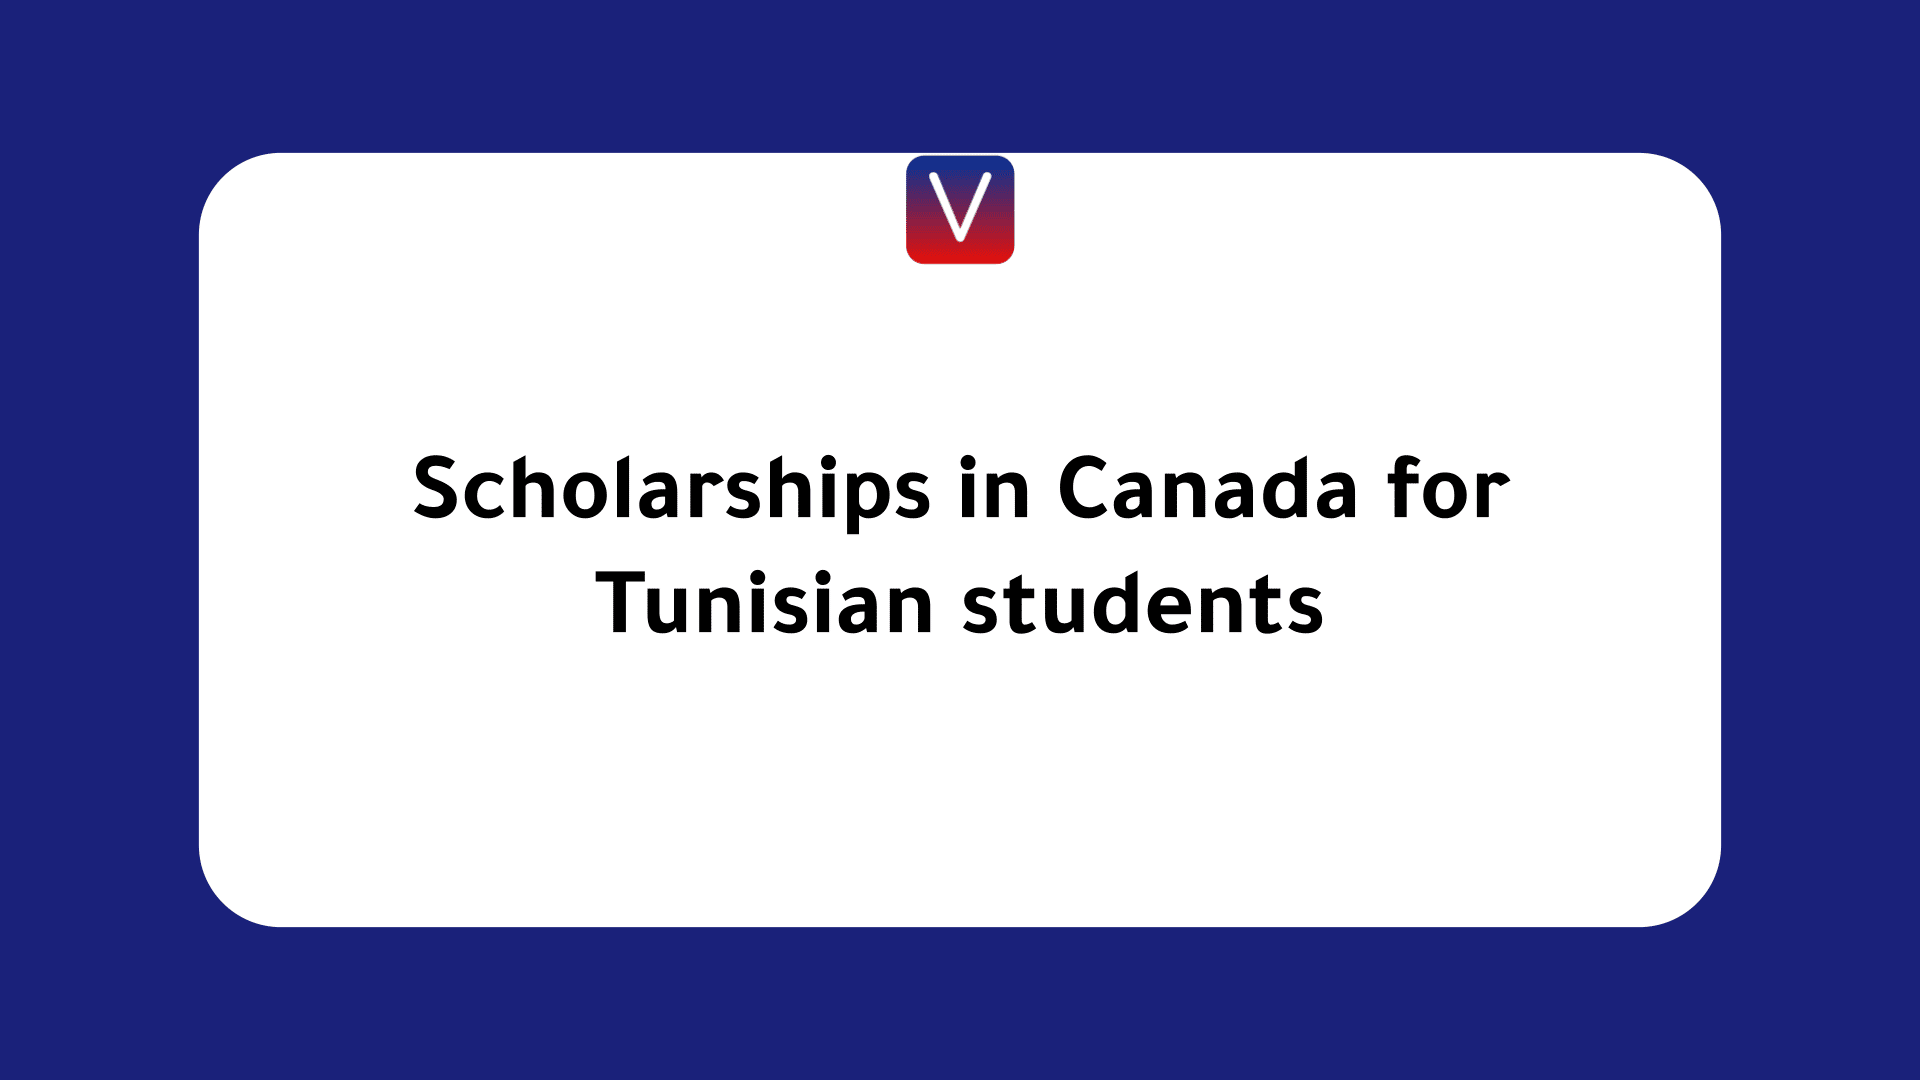 Scholarships in Canada for Tunisian students